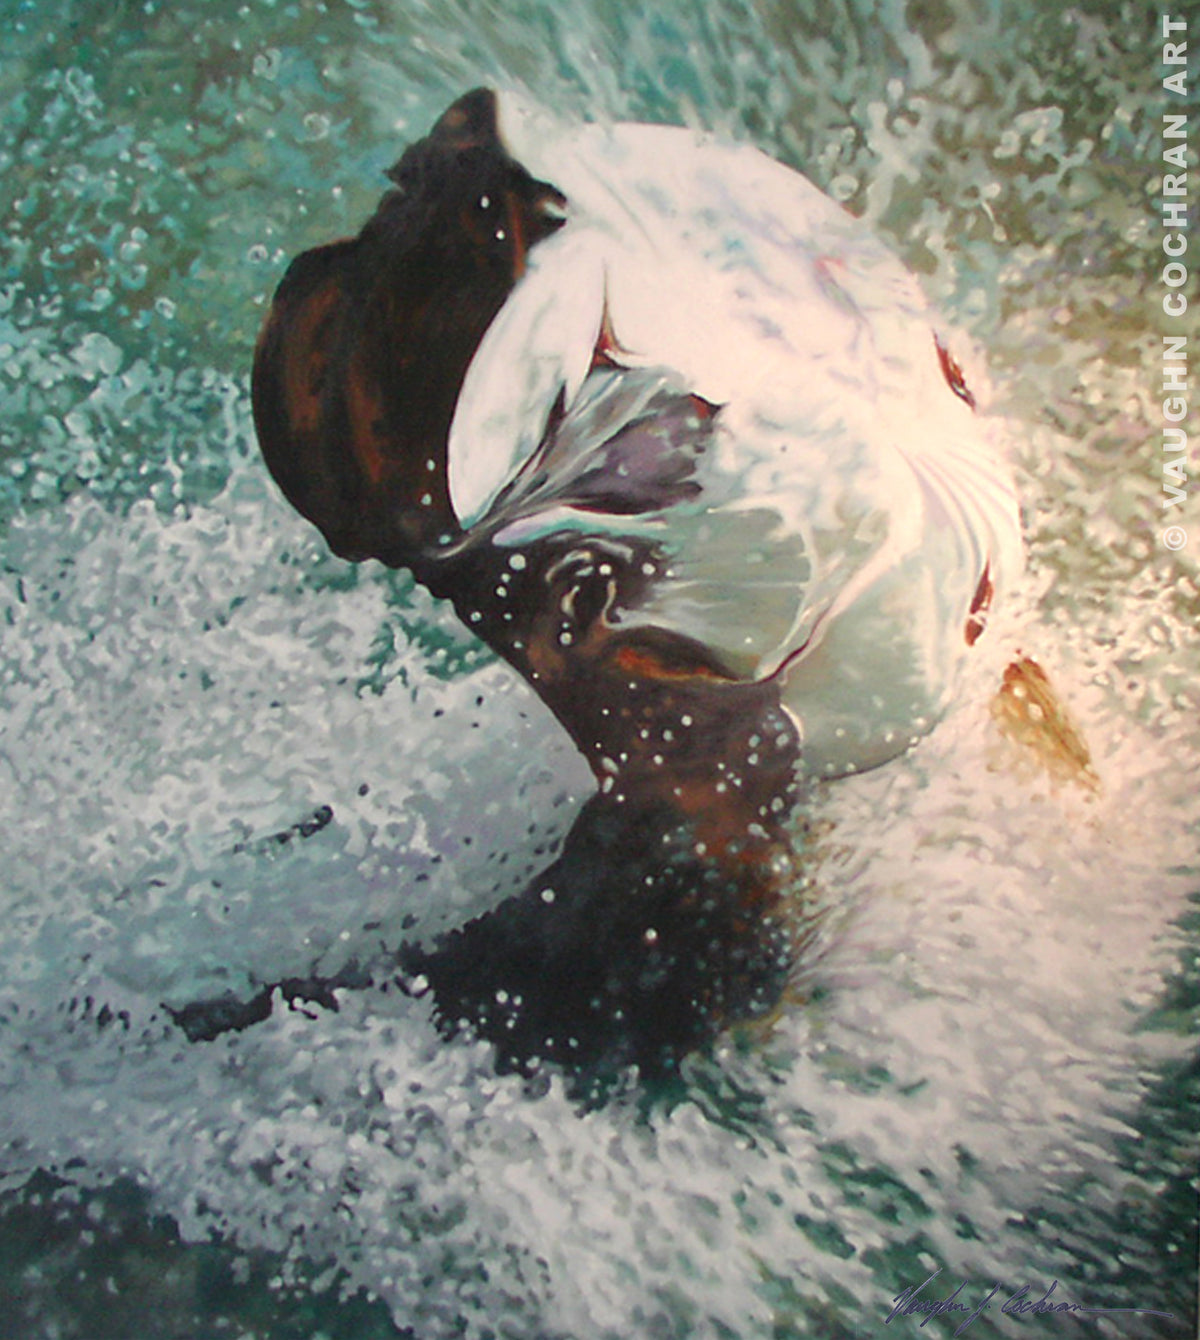 Tarpon at the Boat <br /><span style='color:#f00;font-weight:bold;'>Original SOLD <br />Prints on canvas or paper available</span>